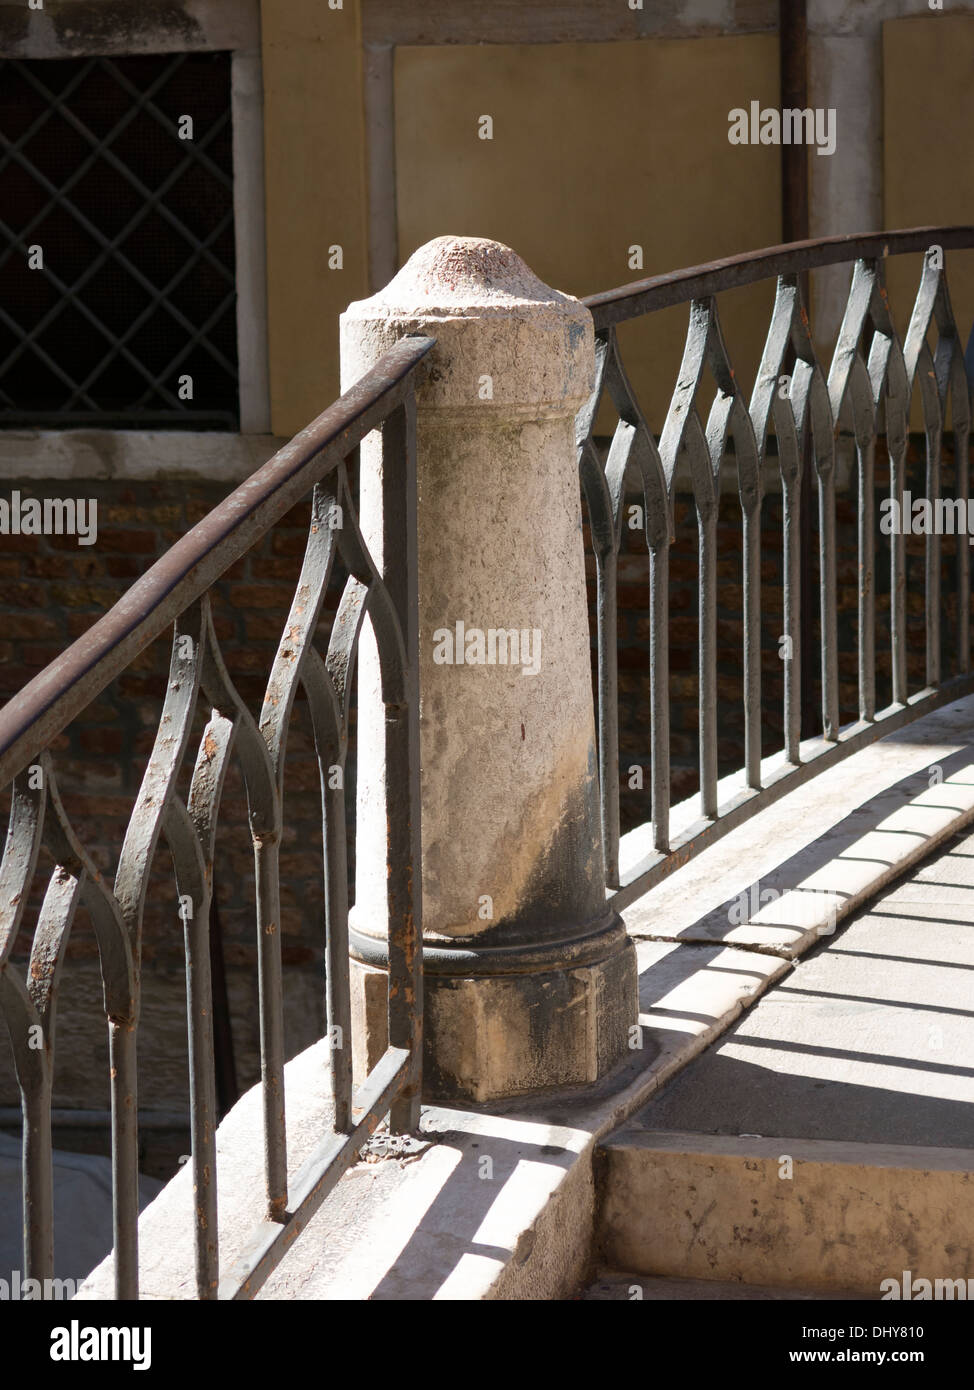 Sunlit, ornate, curved iron hand railings and stone pillar on arched bridge parapet, Venice, Italy. Stock Photo